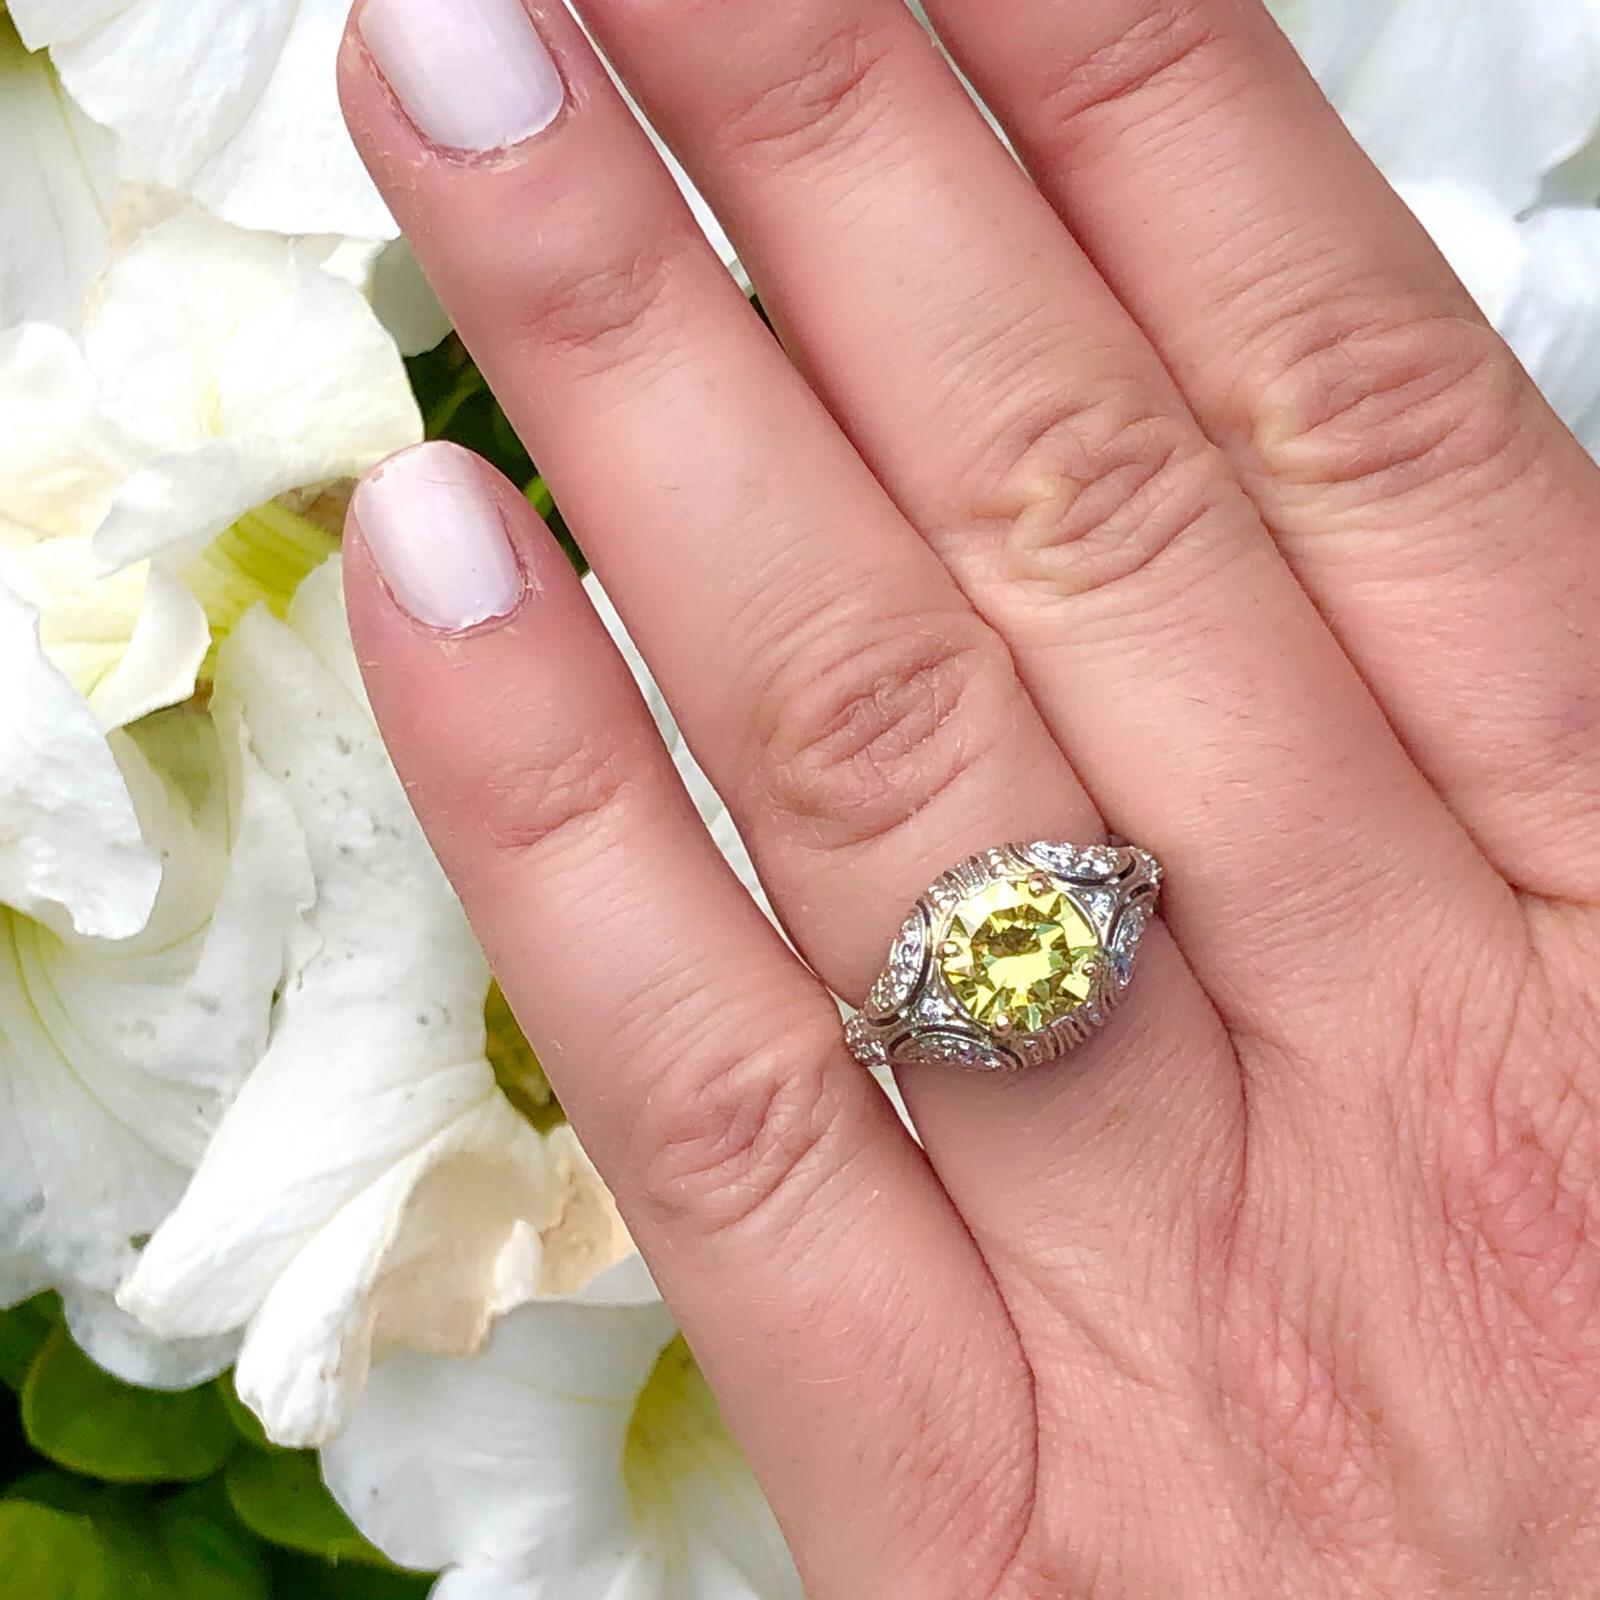 A distinctly one-of-a-kind ring. Set with an extraordinary 1.69-cts. octagonal modified brilliant-cut Fancy Intense Yellow diamond, SI1 clarity, on a handcrafted French-made openwork mounting be celebrated designer Sebastien Barier, which is set